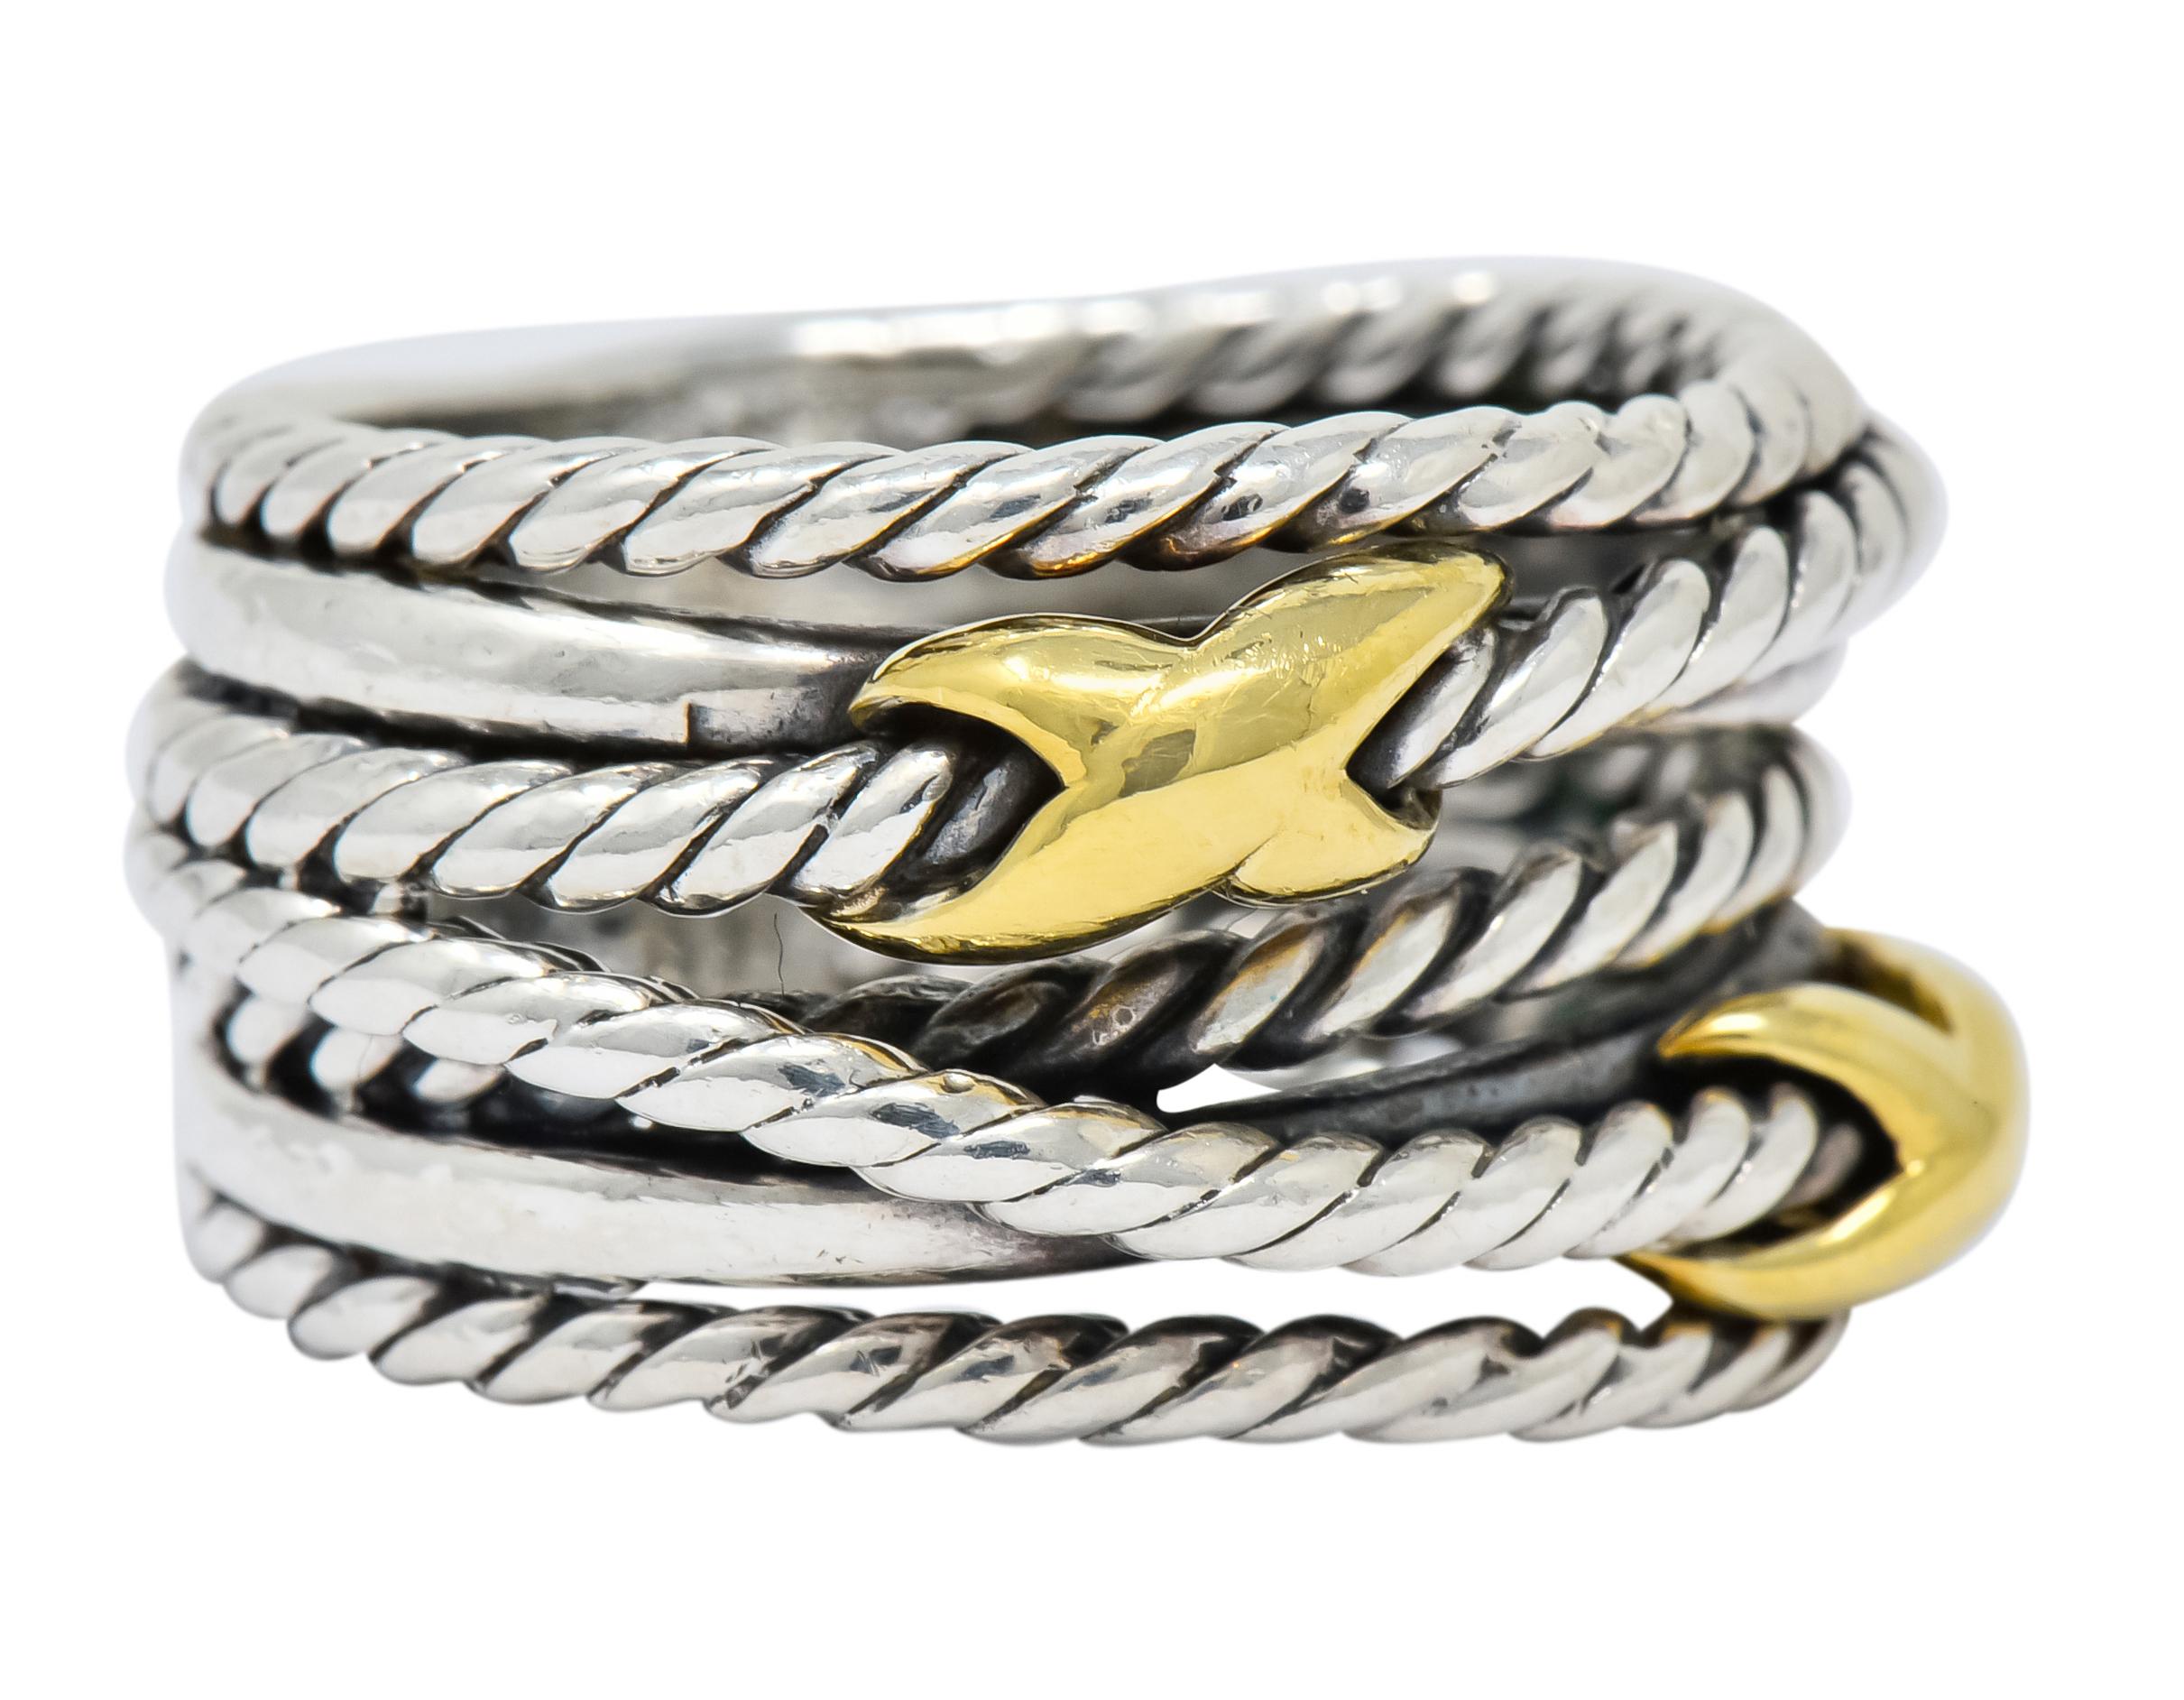 Comprised of seven intersecting sections with twisted cable motif

Accented by two polished gold “X” stations 

Signed DY David Yurman 

Stamped 925 and 750 for sterling silver 18 karat gold, respectively

Ring size 5.5

Top measures: 11.5 mm and